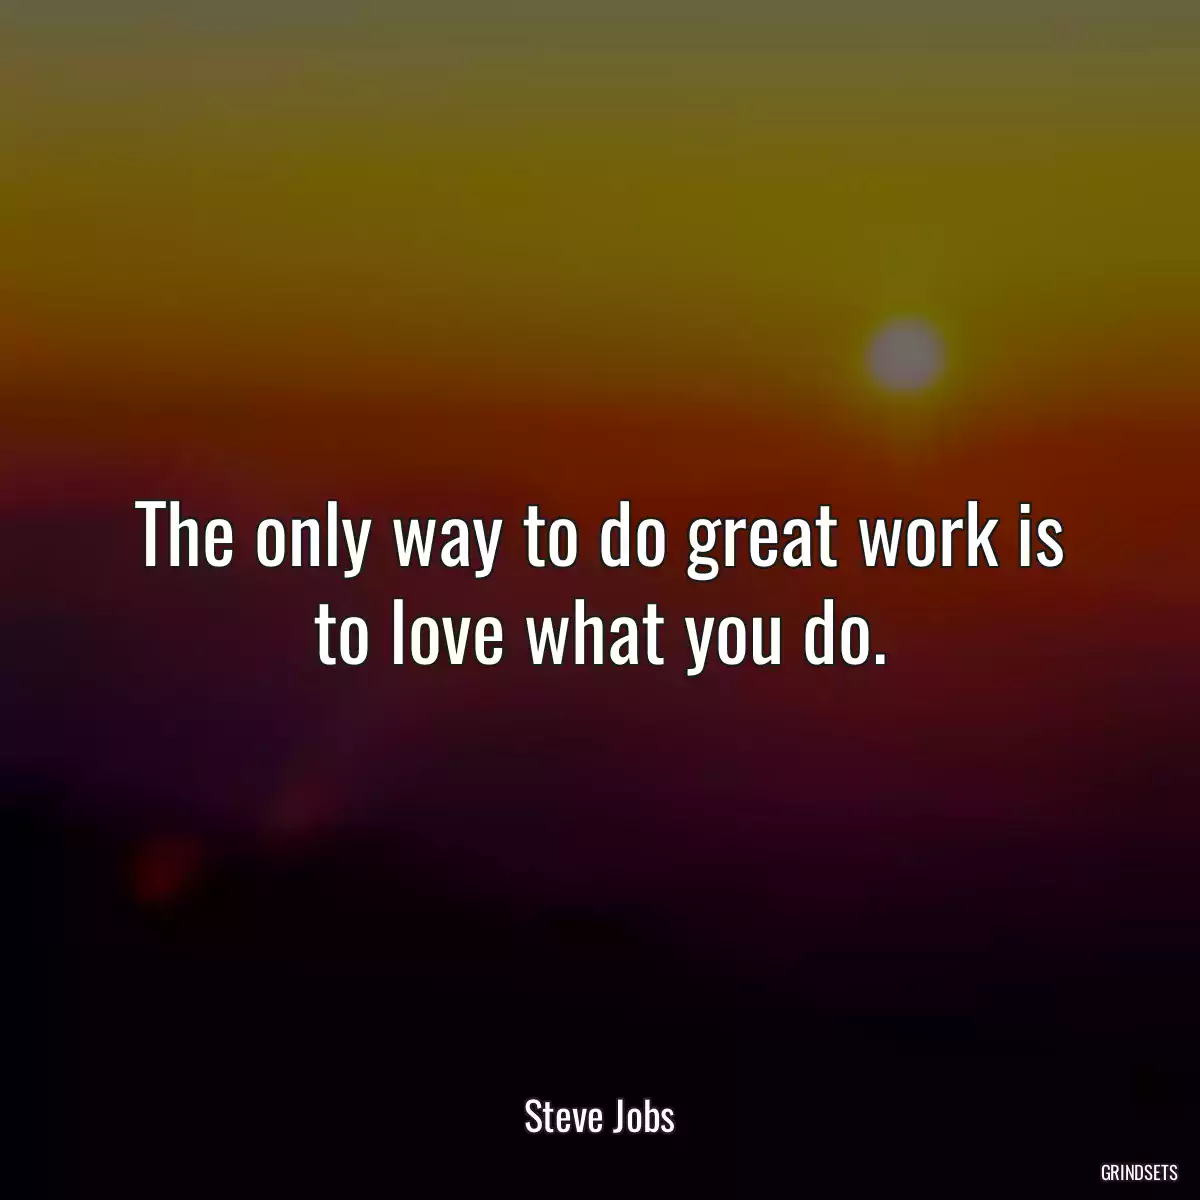 The only way to do great work is to love what you do.